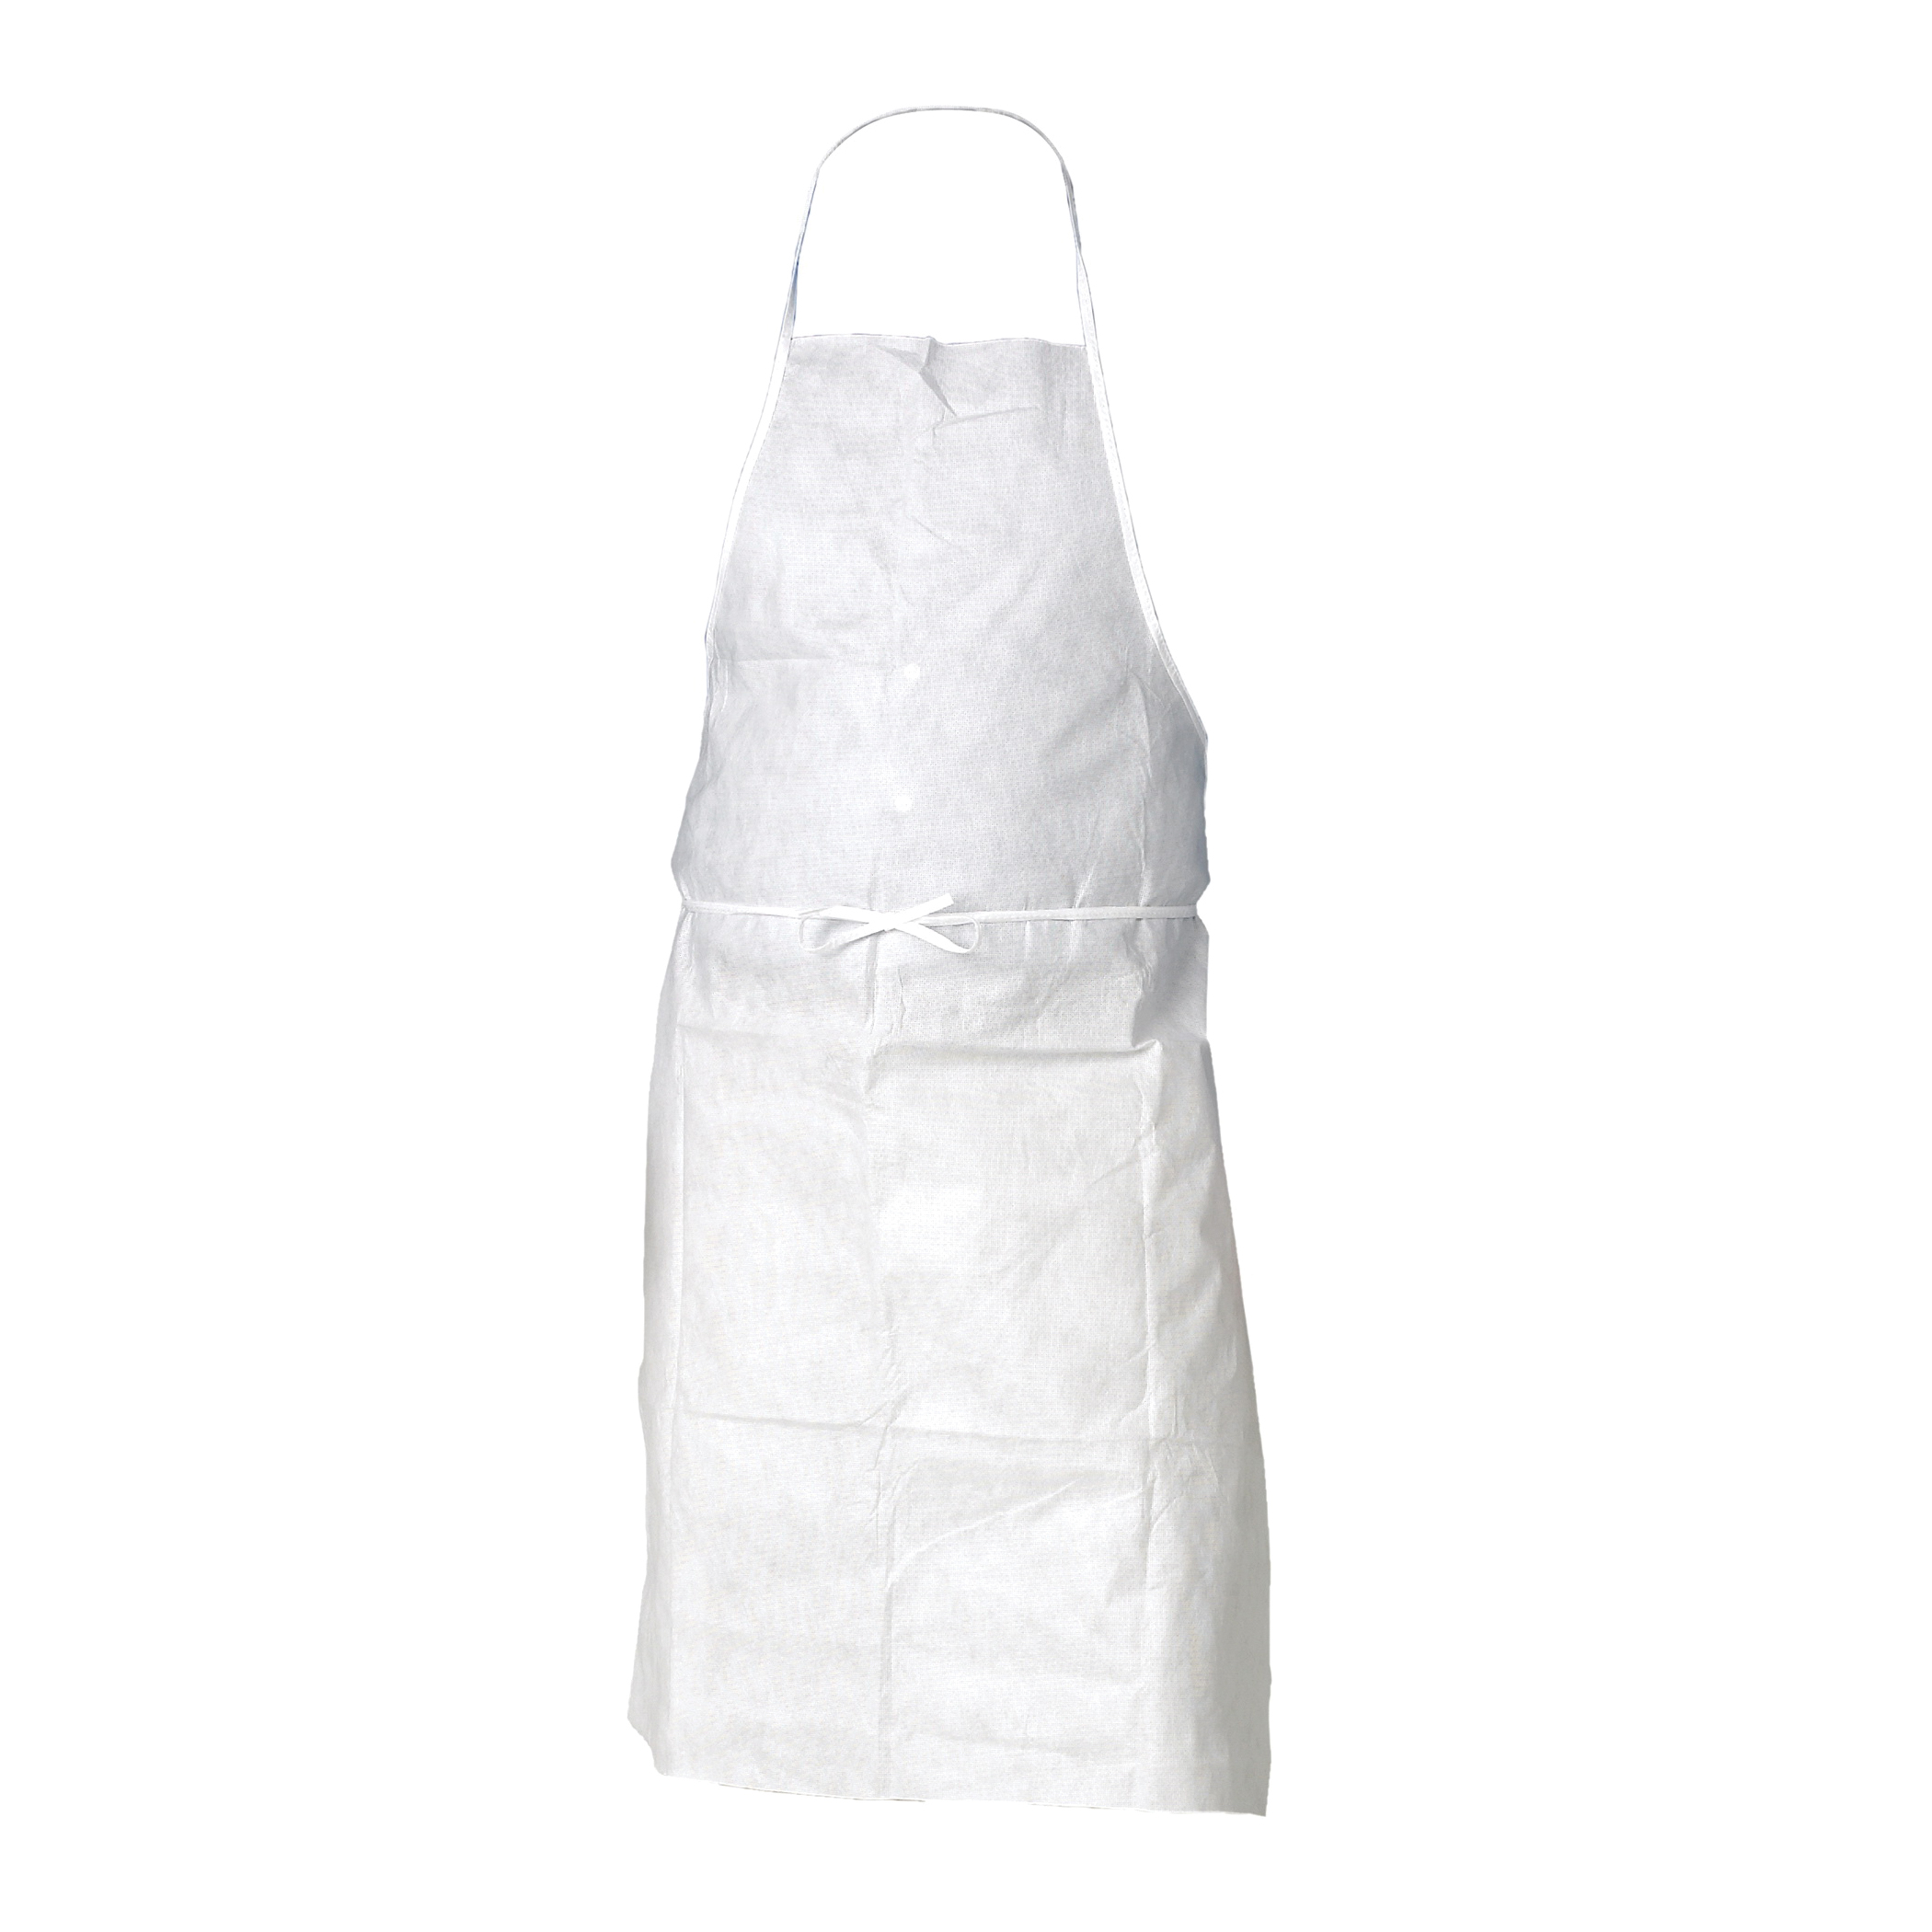 KleenGuard™ 36550 A20 Breathable Protective Apron, MICROFORCE™ SMS Fabric, 40 in L x 28 in W, Tie in Back Closure, Resists: Dry Particles and Light Liquid Spray